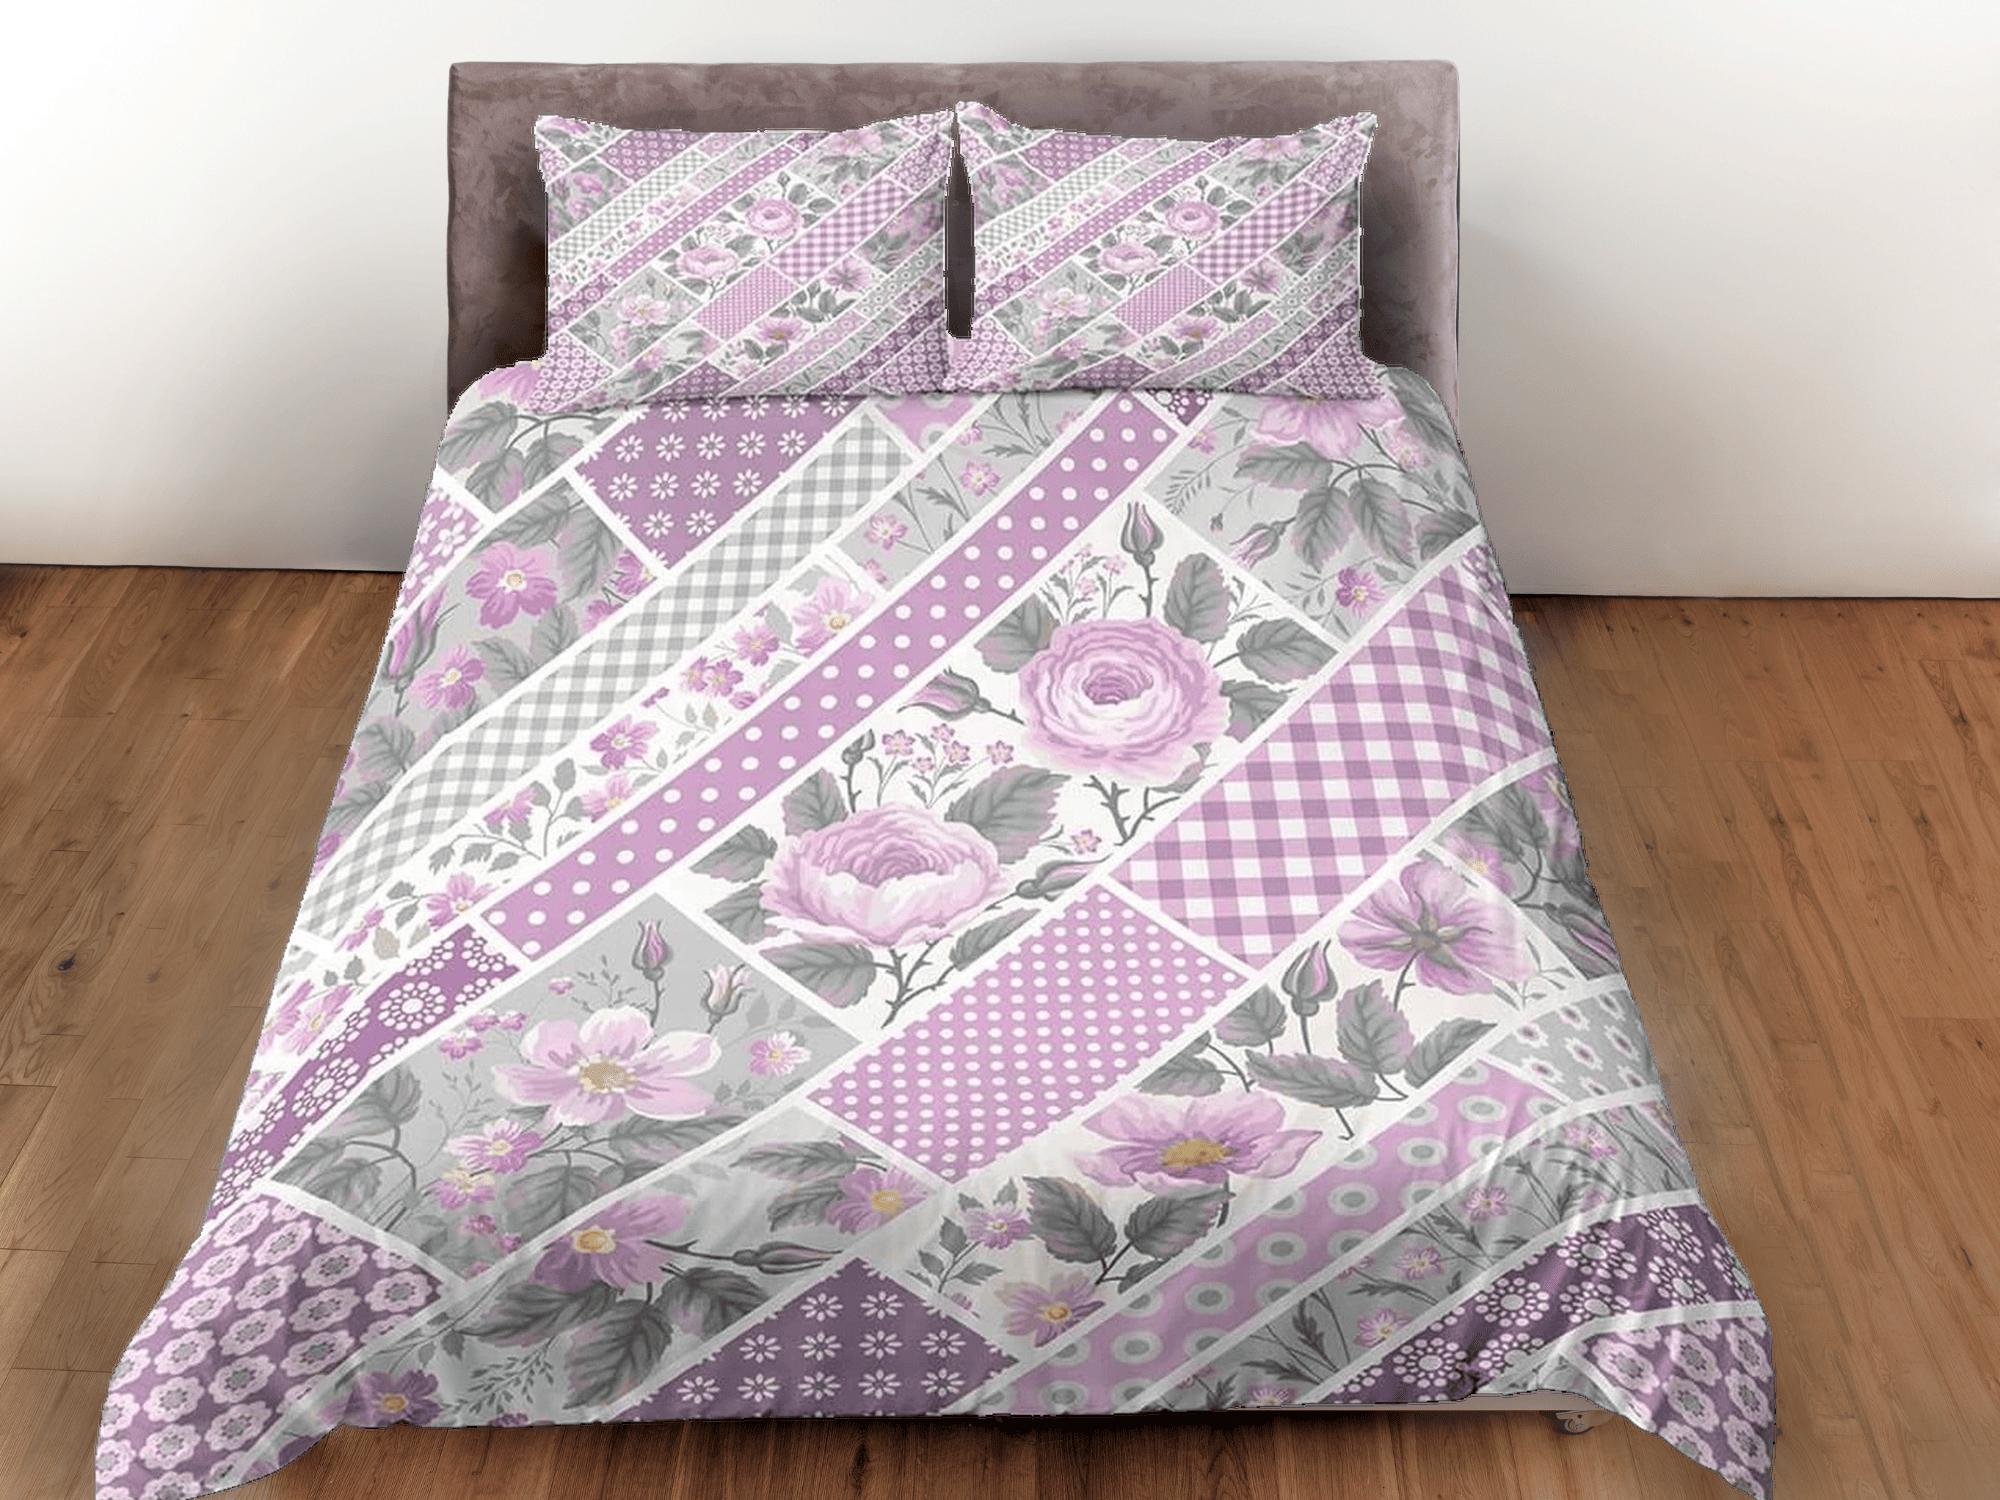 daintyduvet Pink floral patchwork quilt printed duvet cover set, aesthetic room decor bedding set full, king, queen size, boho bedspread shabby chic